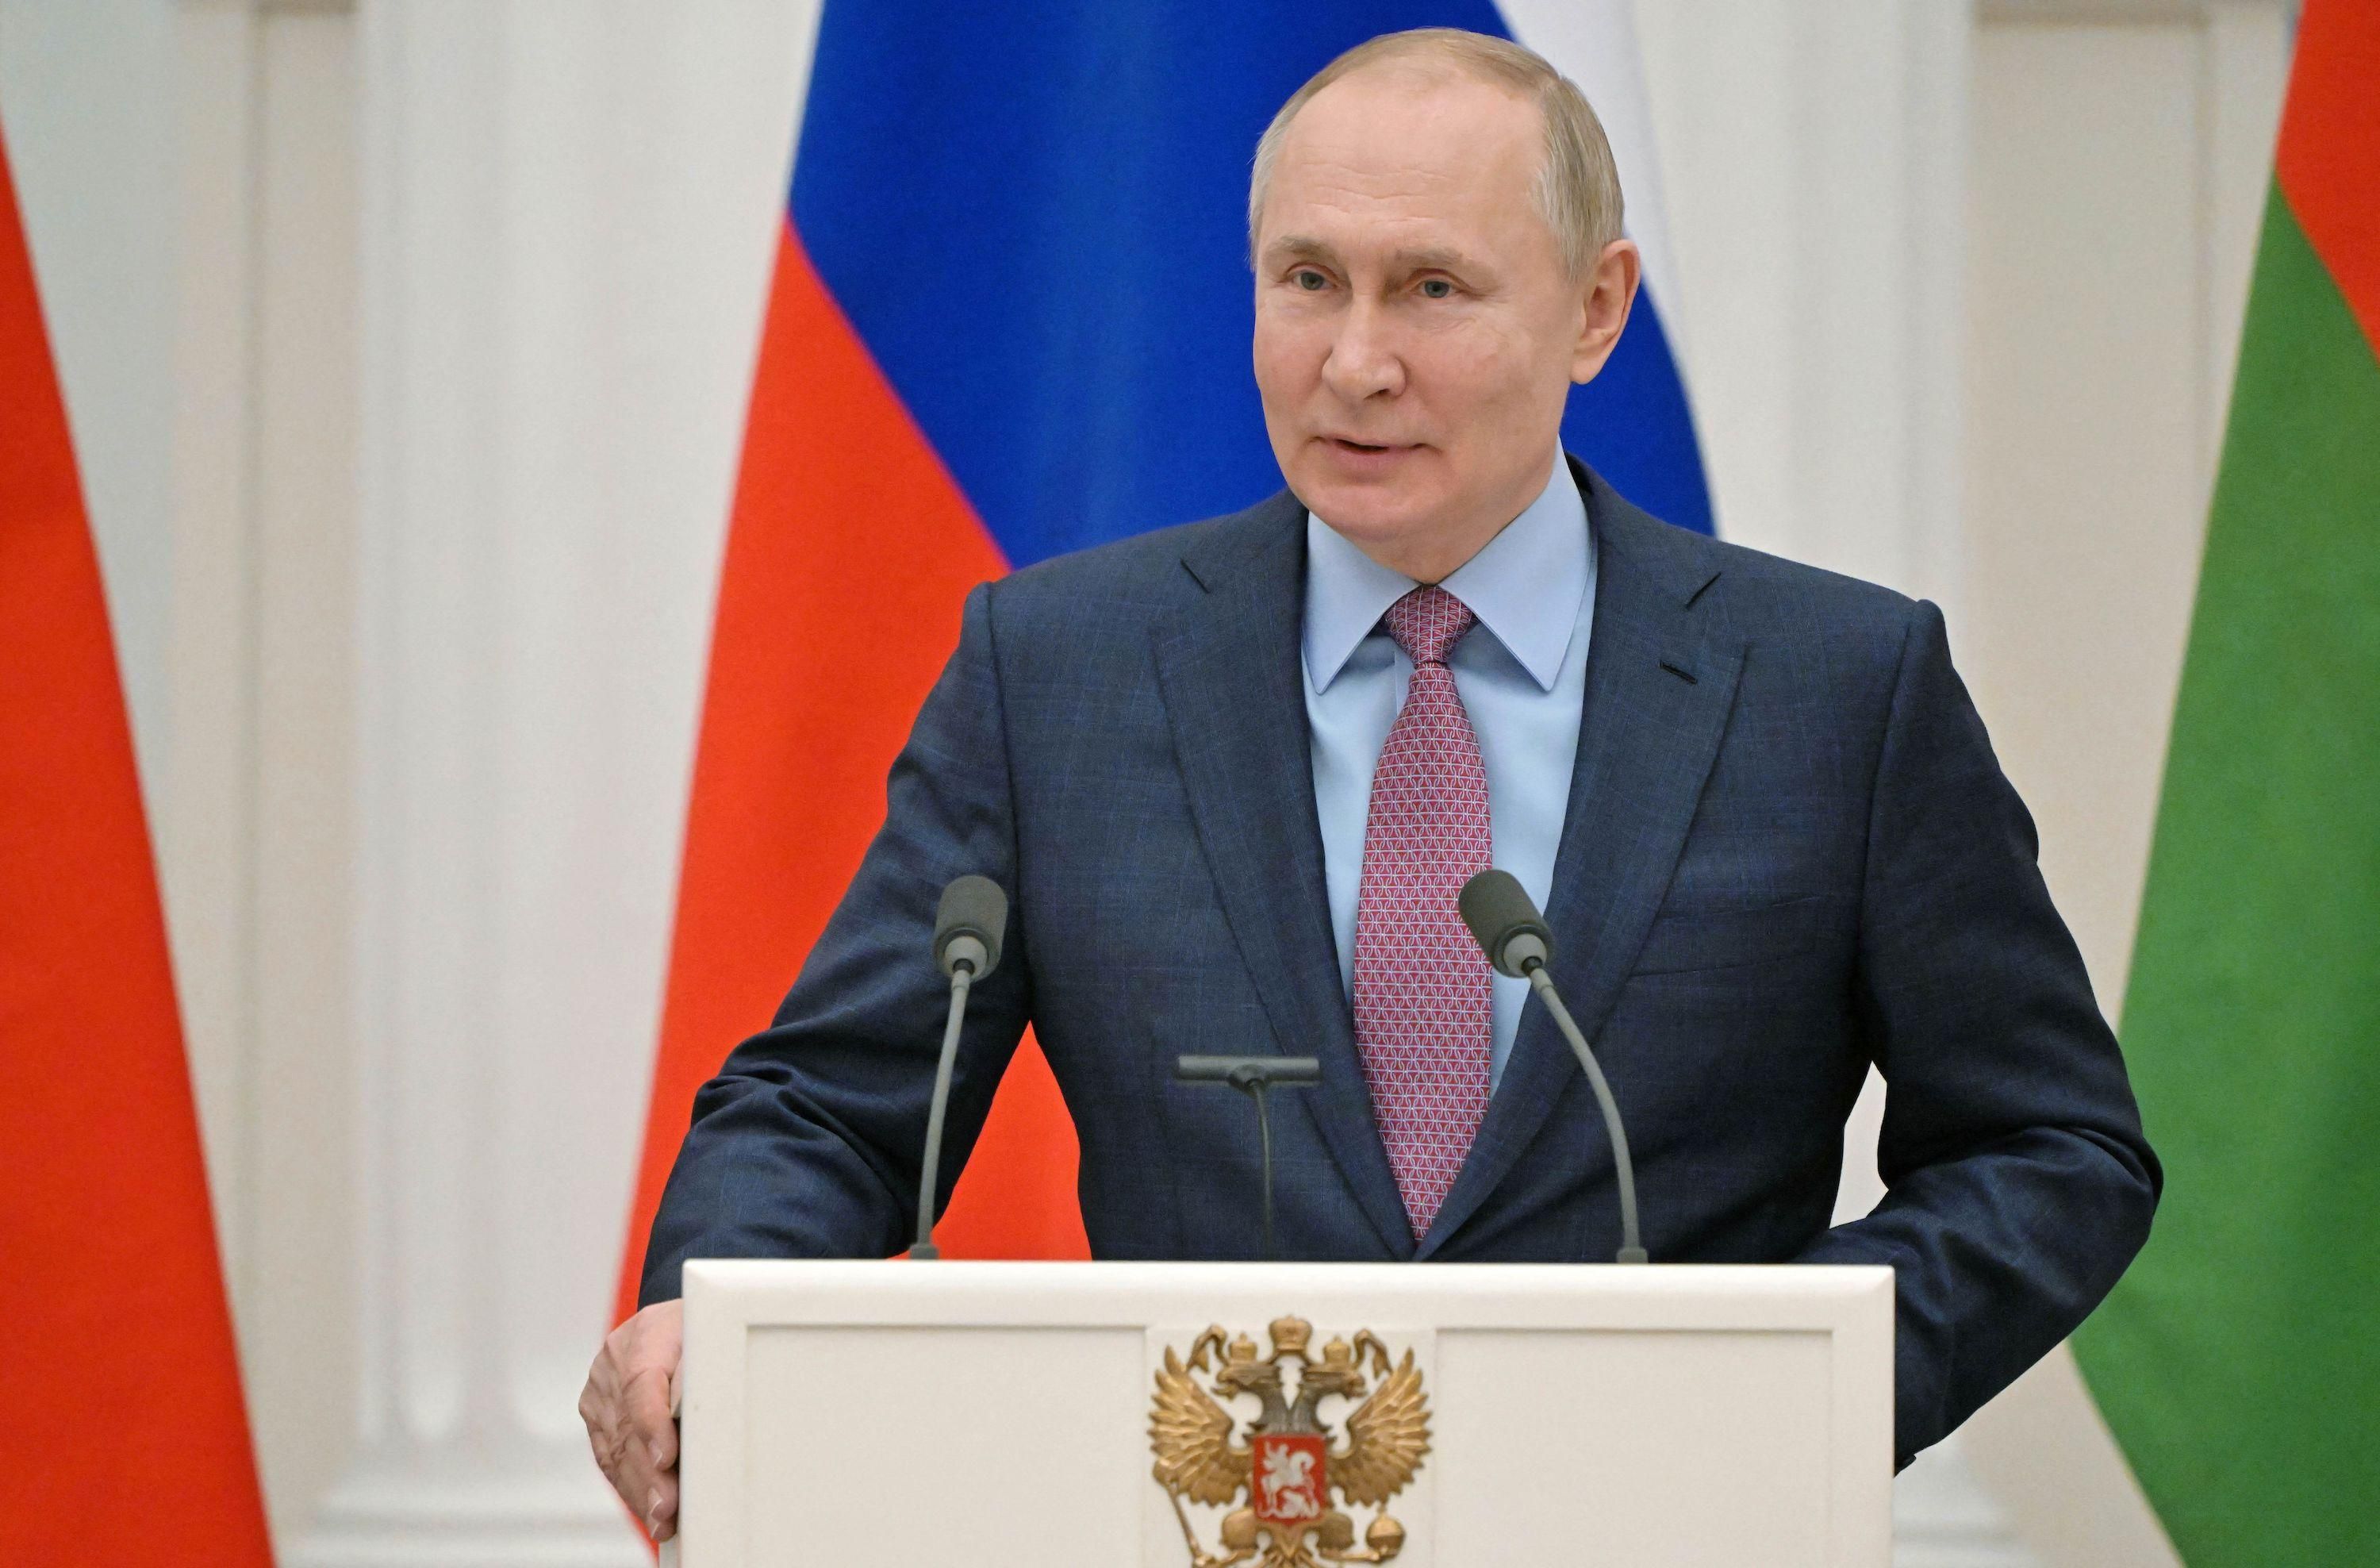 Russia's President Vladimir Putin speaks during a press conference with his Belarus counterpart, following their talks at the Kremlin in Moscow on February 18, 2022